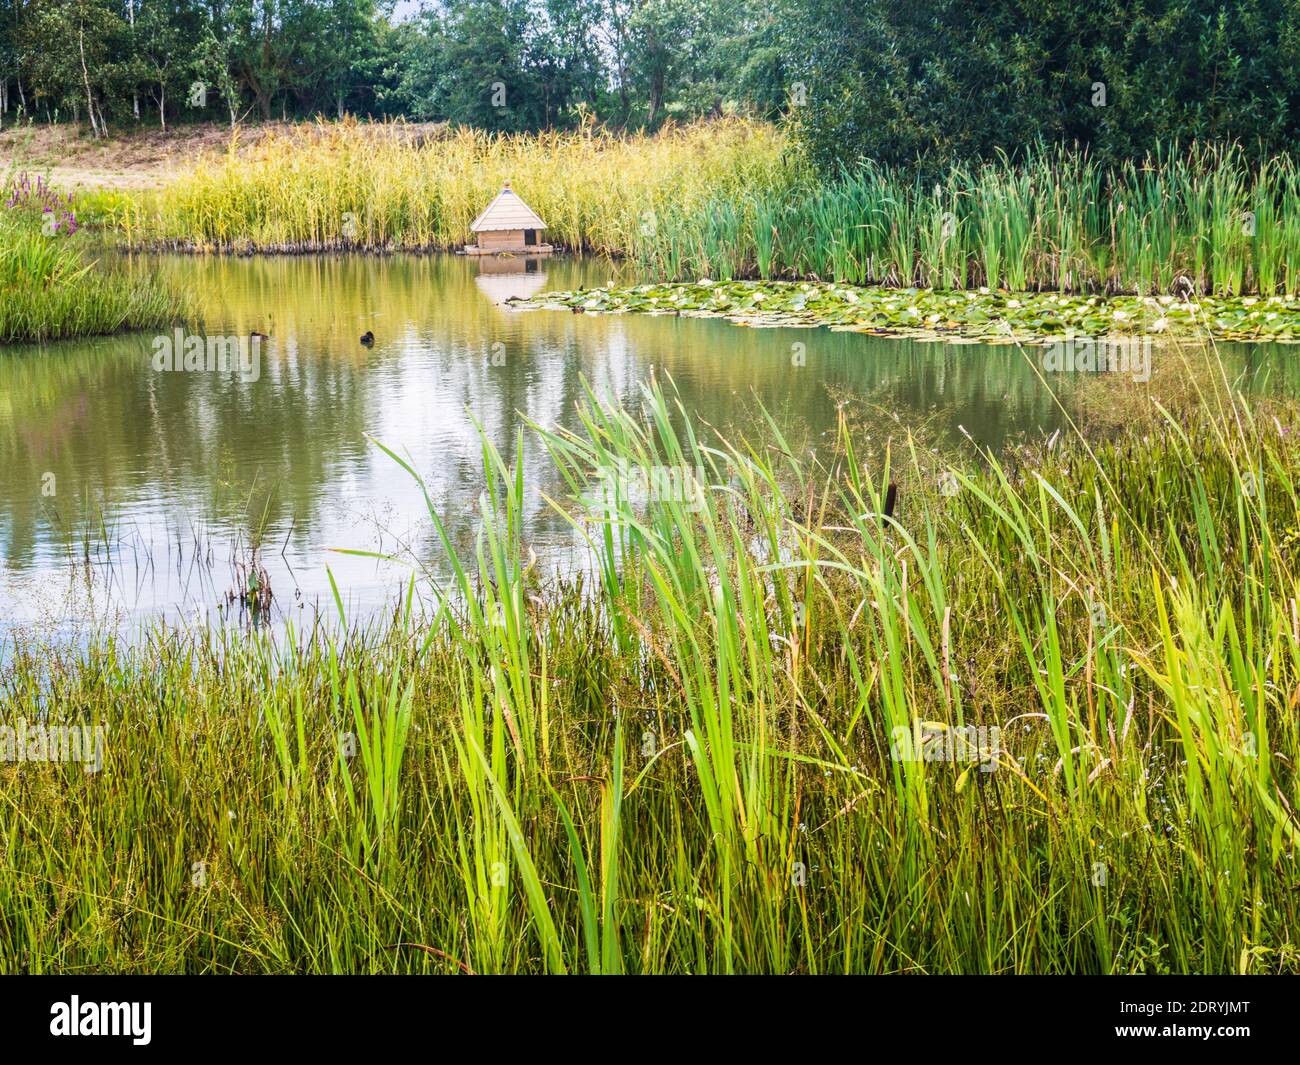 A duck house on a pond in late summer. Stock Photo